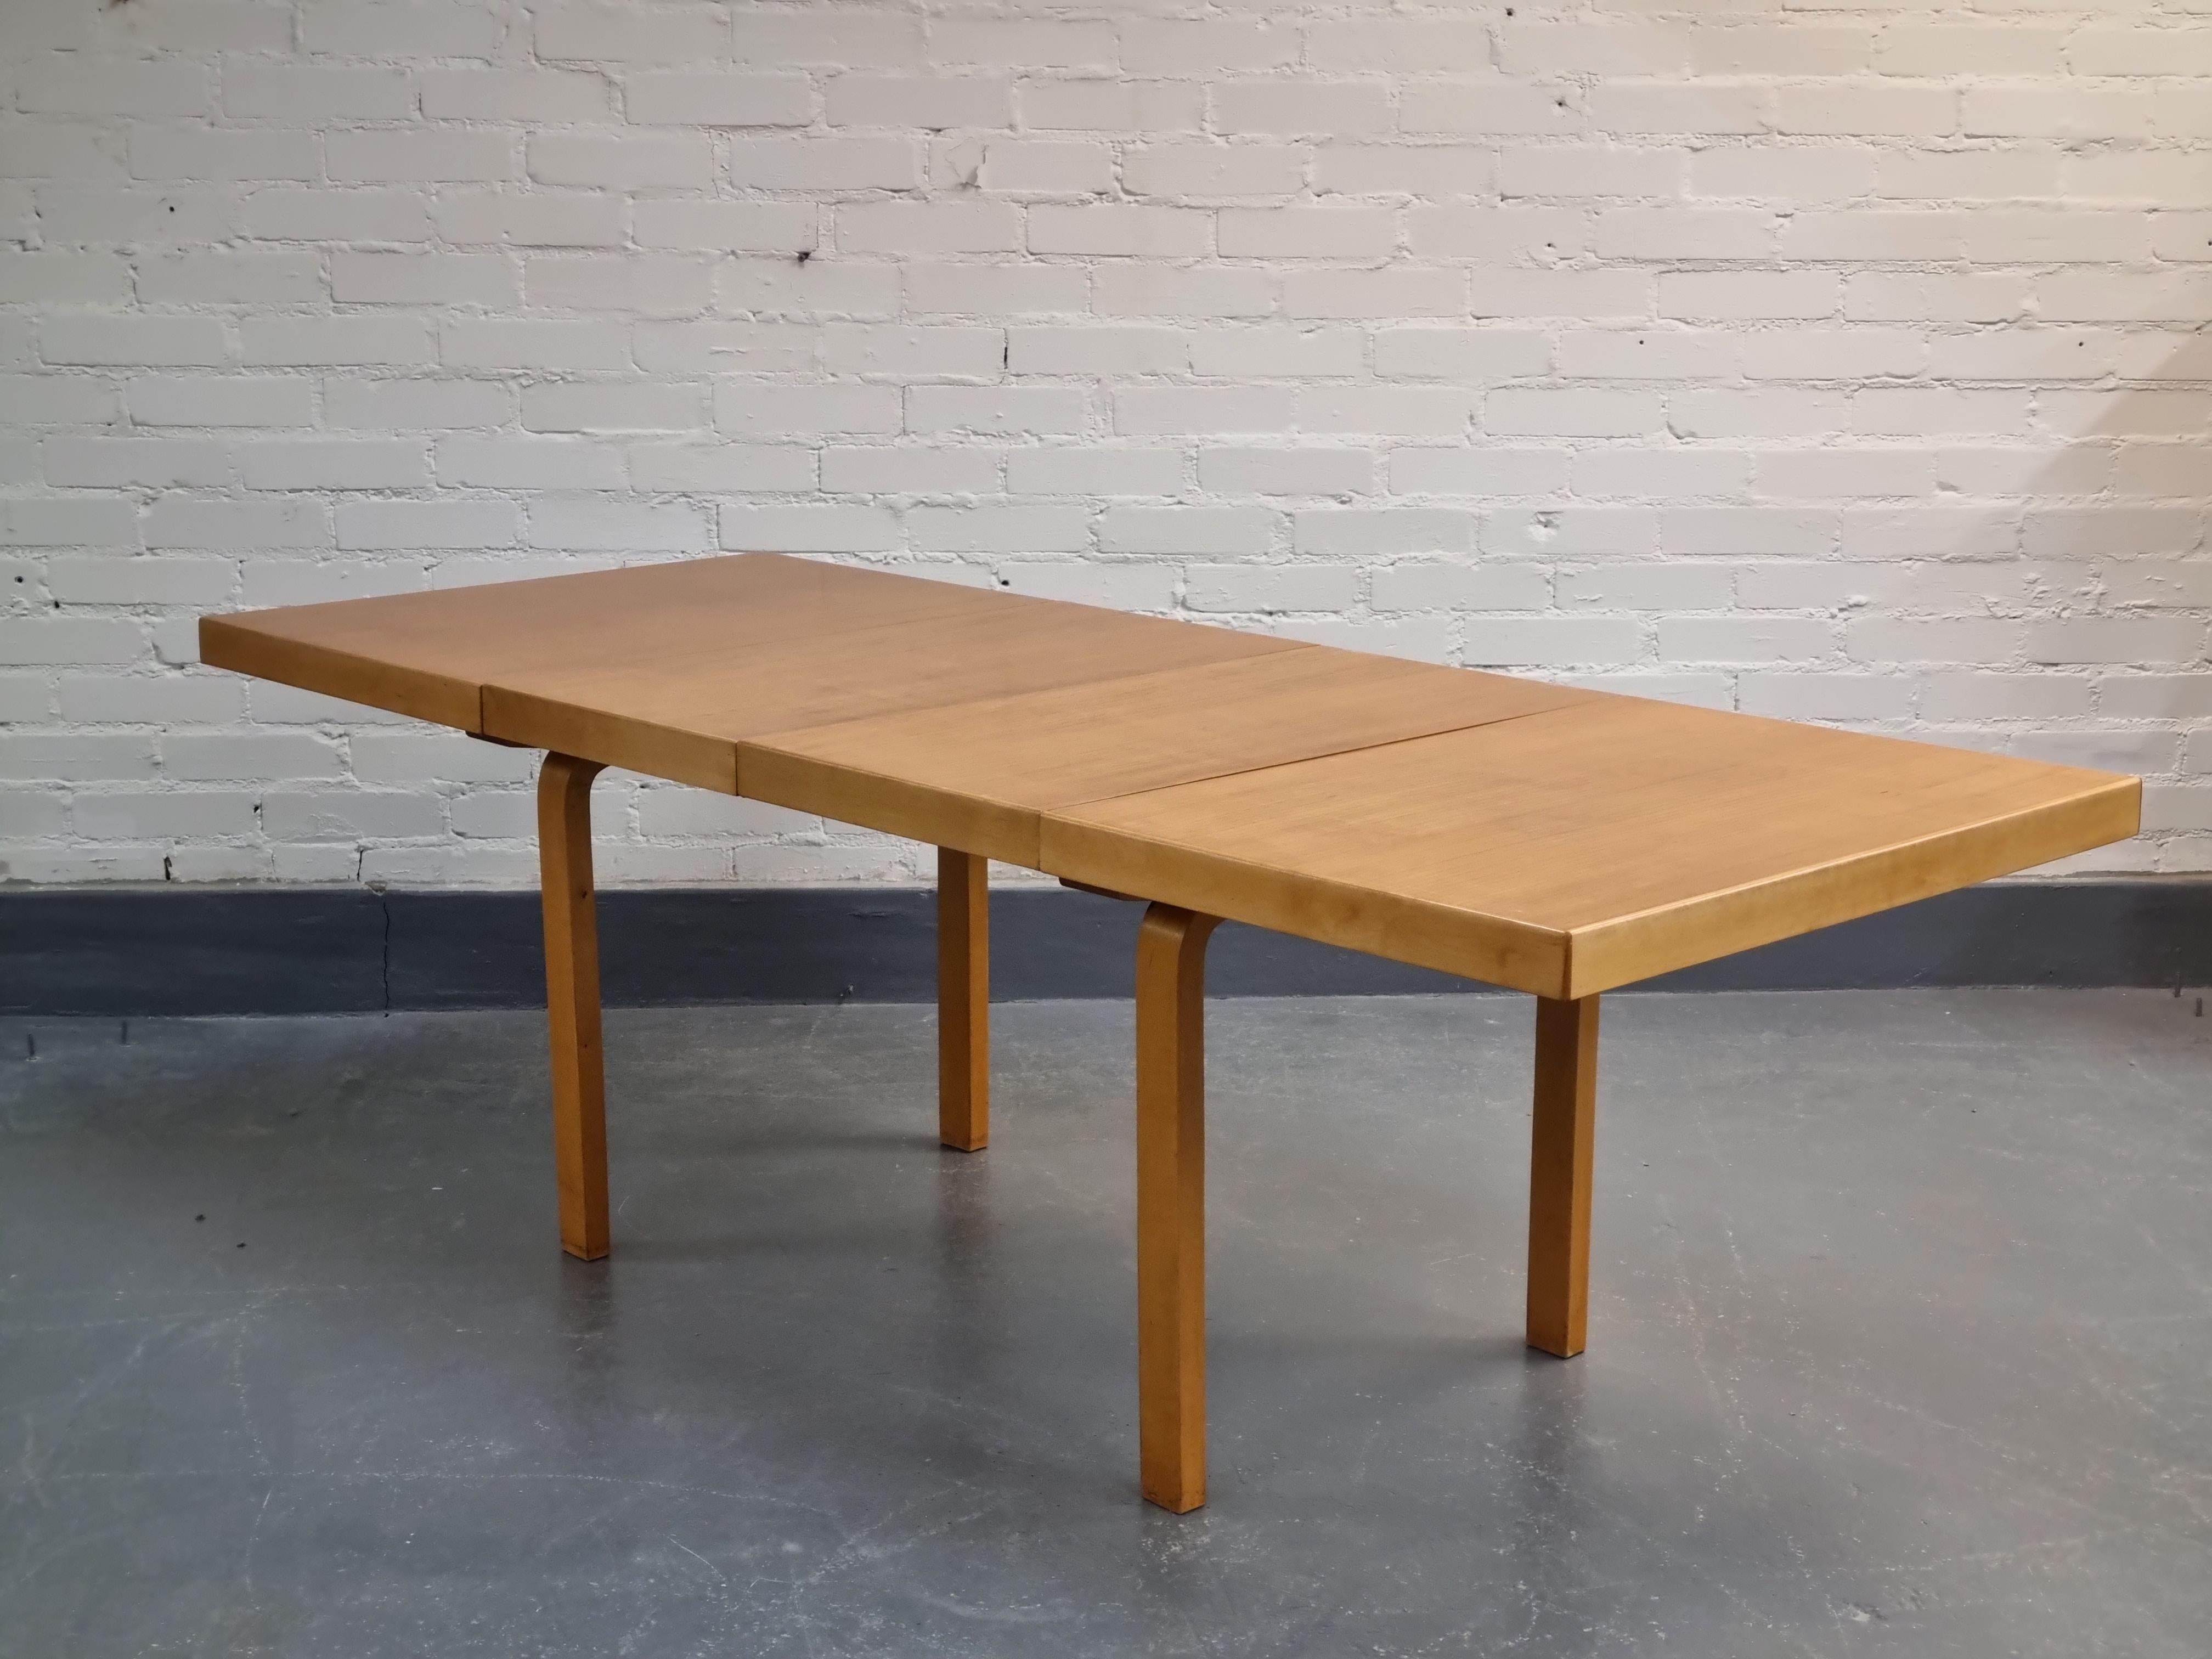 This is a beautiful extending table model 92 by Alvar Aalto from 1940s. Body of the table is solid birch. The surface of the table is laminated by oak veneer. Extension leaf to be stored underneath the tabletop. Total length fully extended with both